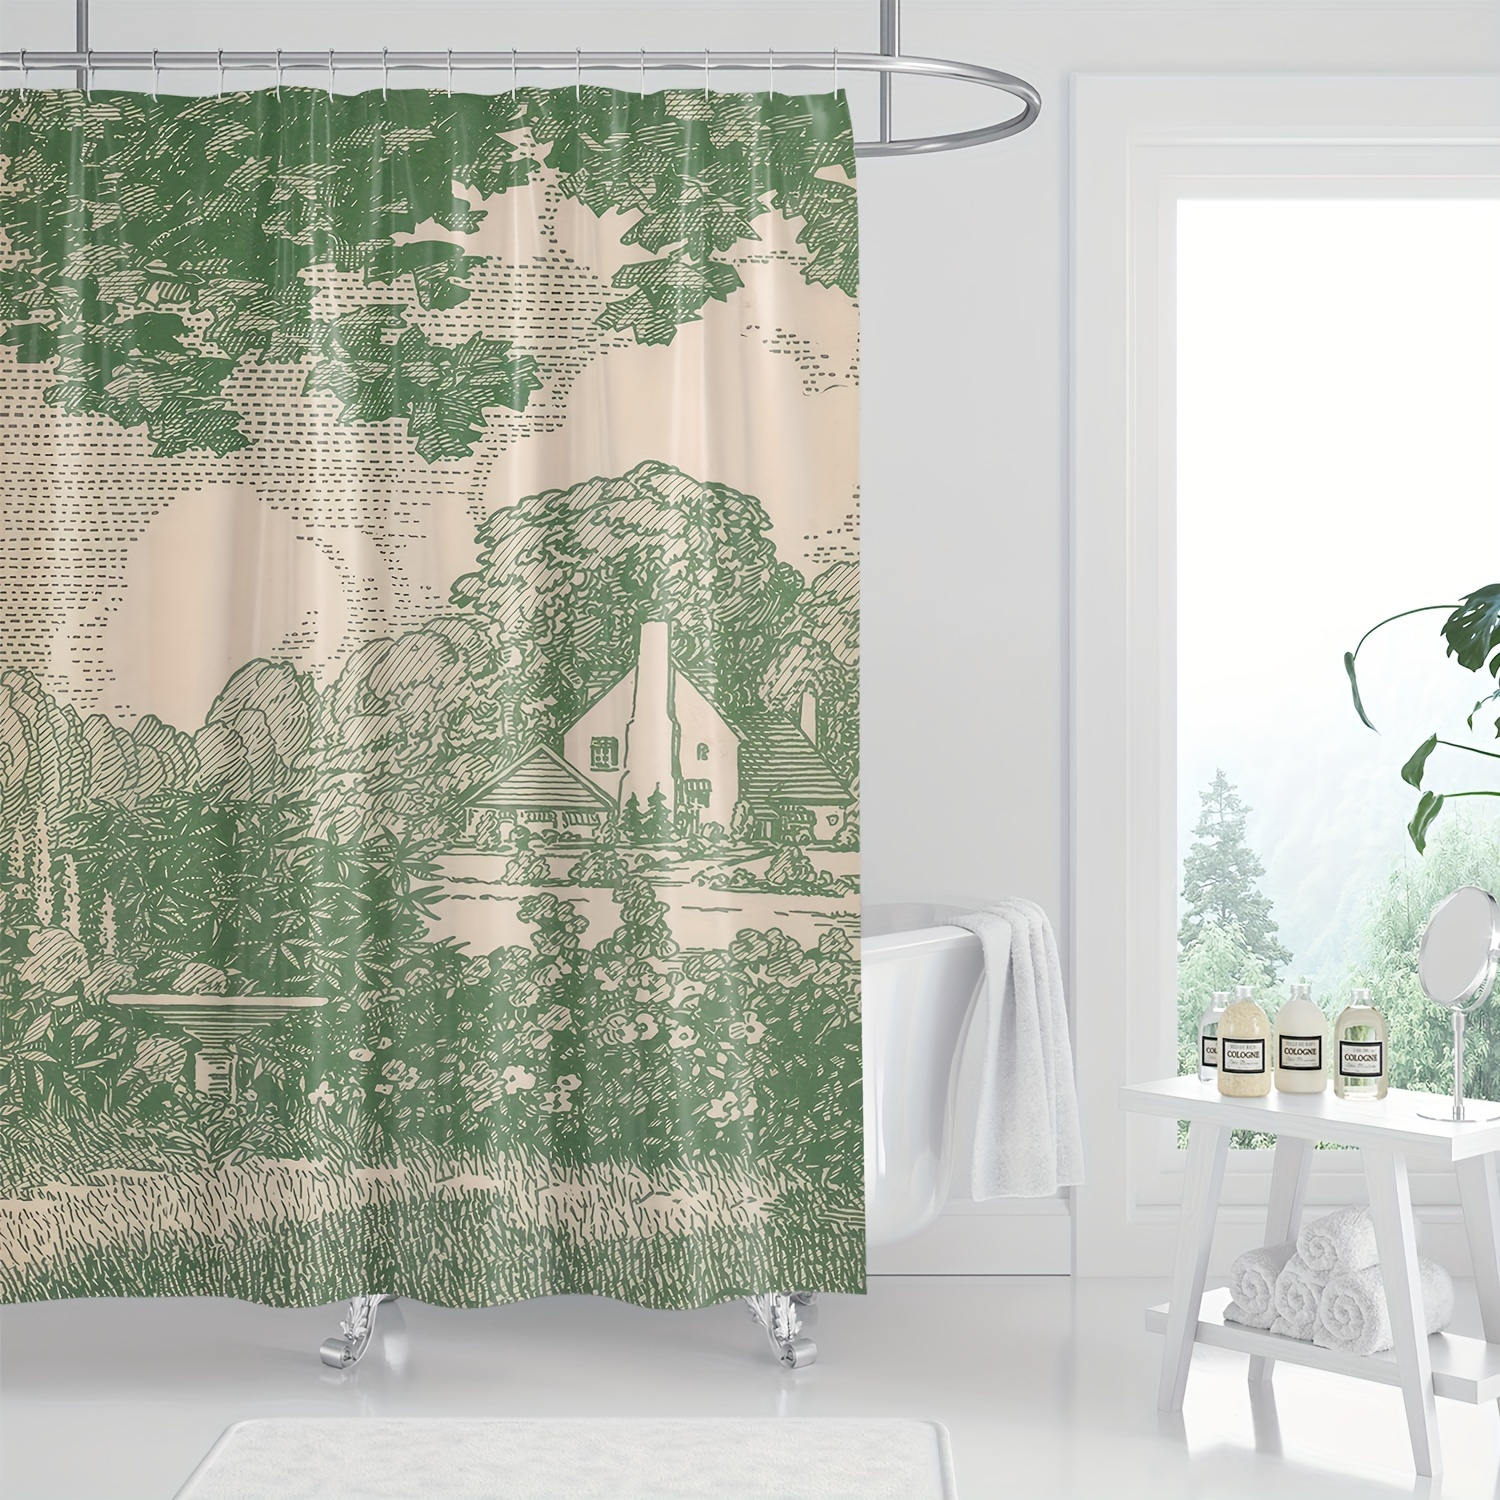 

Vintage Hand-drawn Landscape Print Shower Curtain, Polyester Woven Water-resistant Bathroom Curtain With Hooks, Machine Washable Knit Weave, All-season Artistic Design Shower Curtain